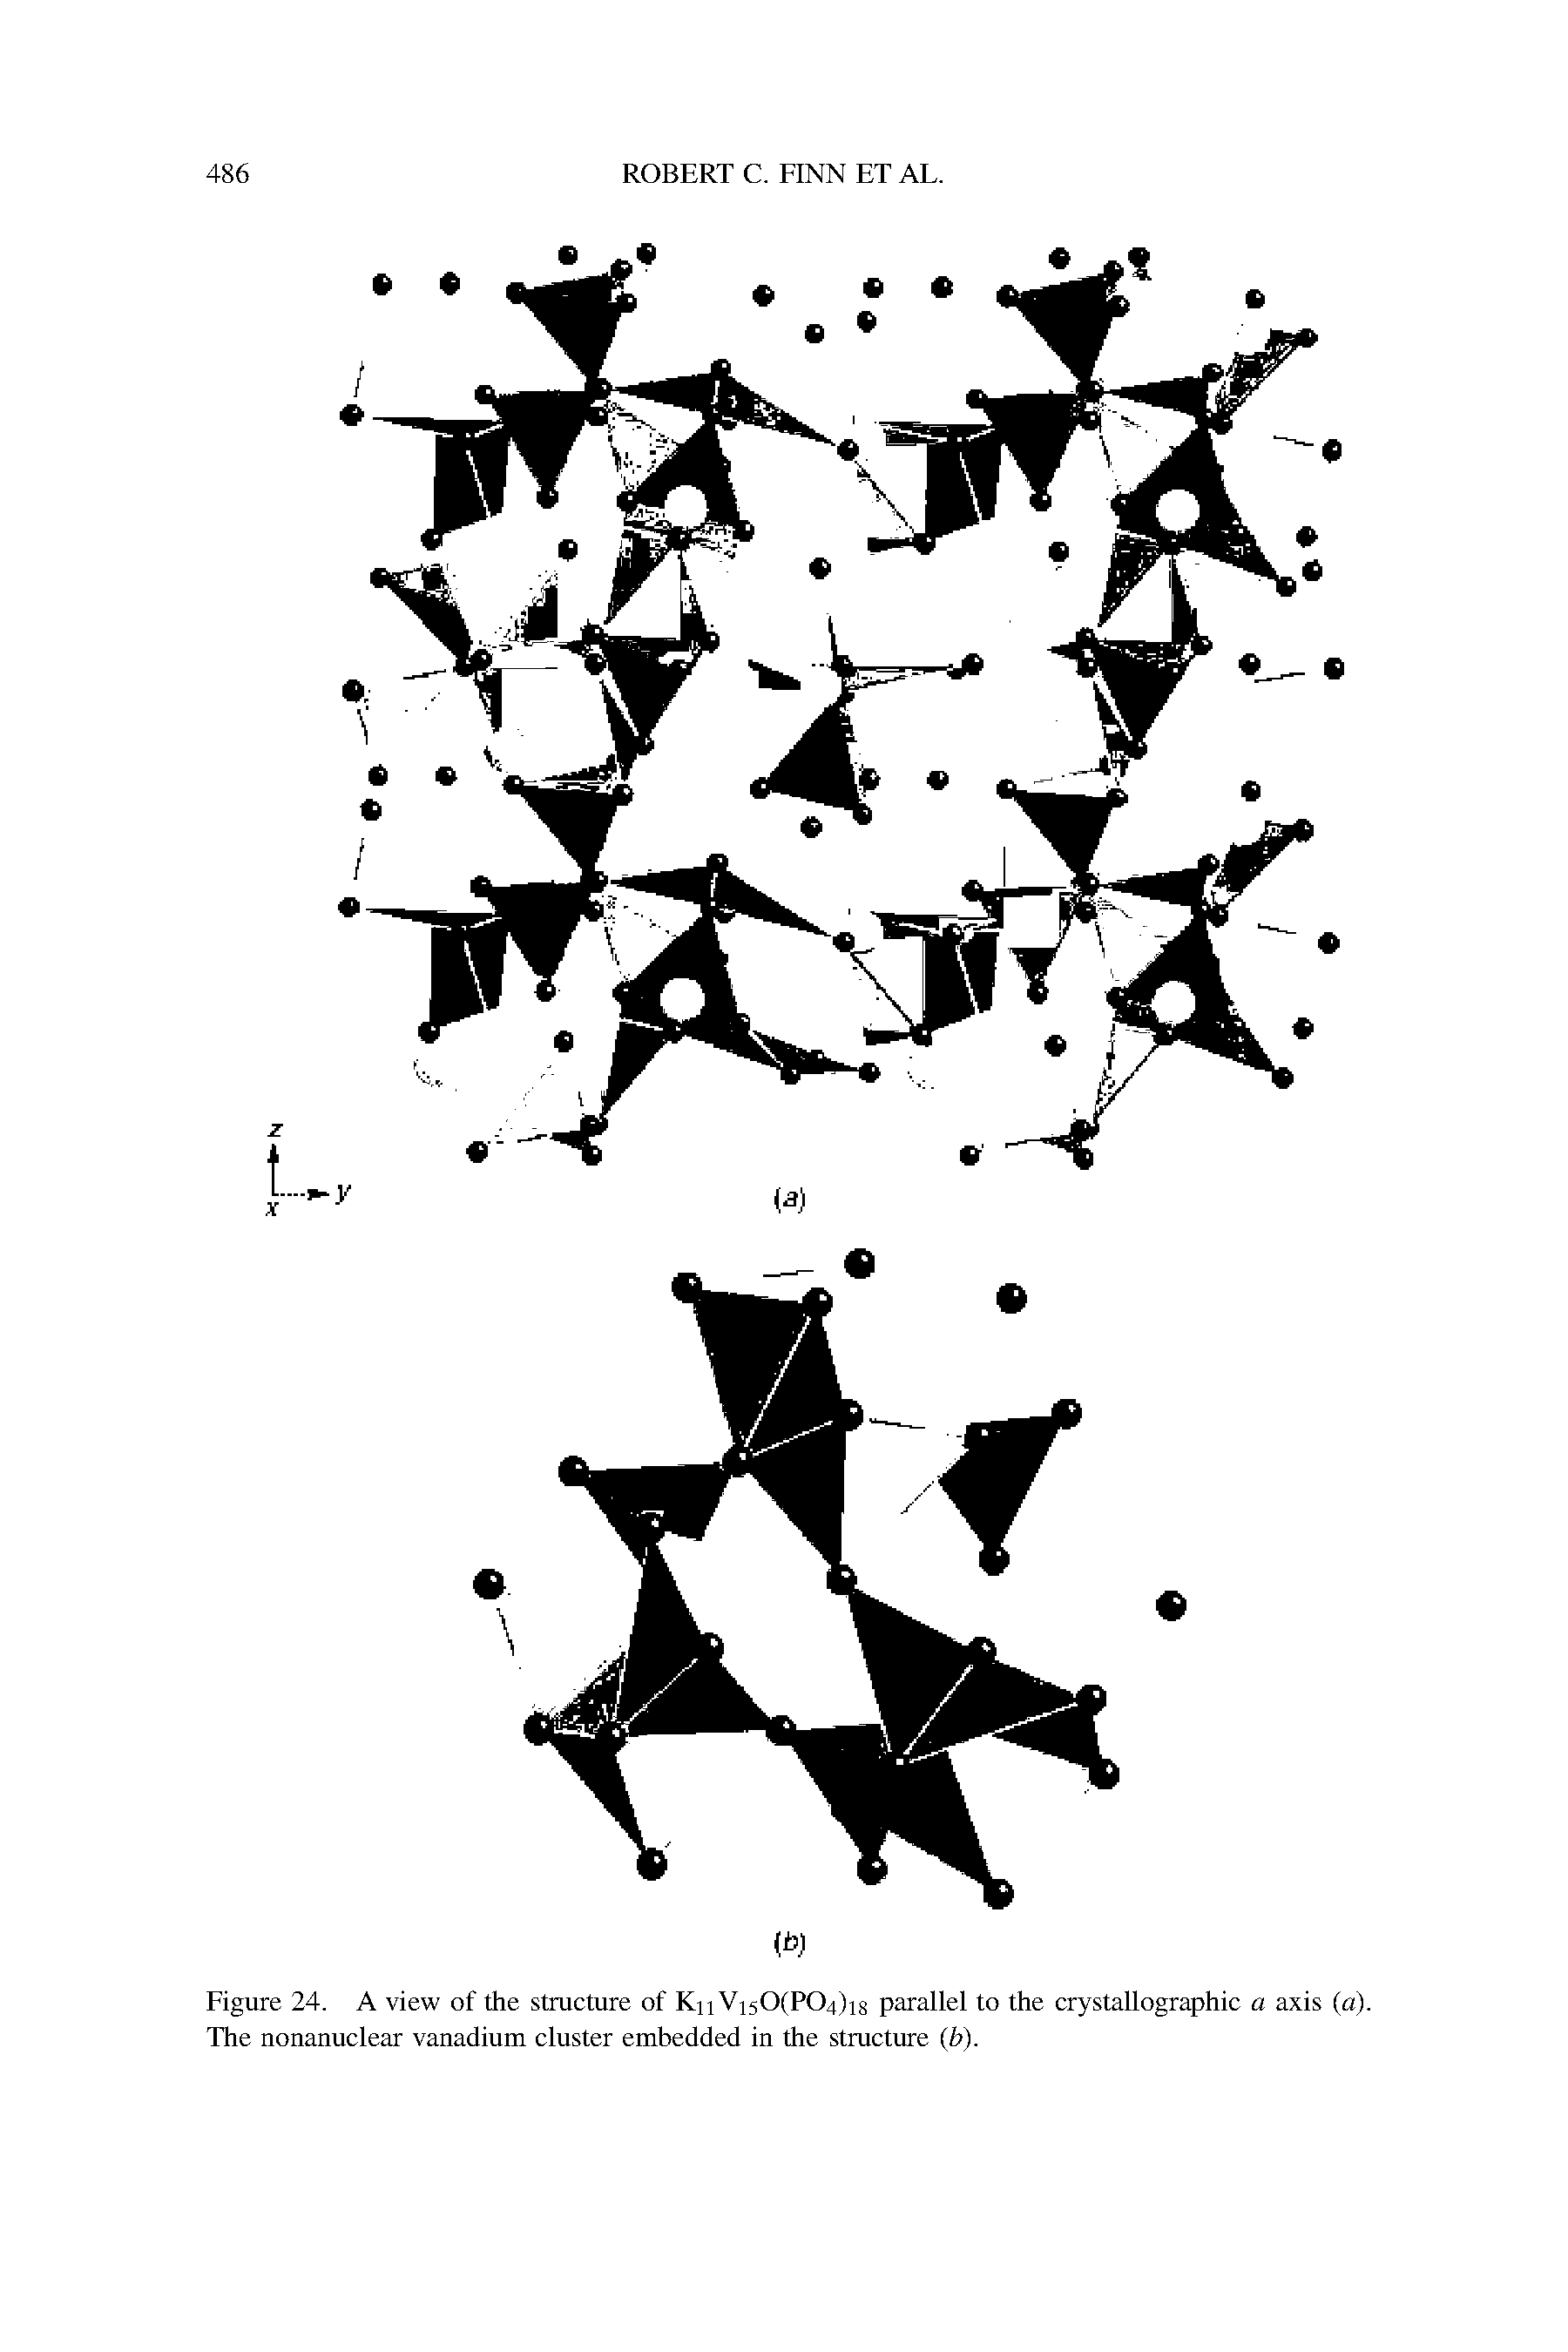 Figure 24. A view of the structure of Kn Vi50(P04)i8 parallel to the crystallographic a axis (a). The nonanuclear vanadium cluster embedded in the structure (b).